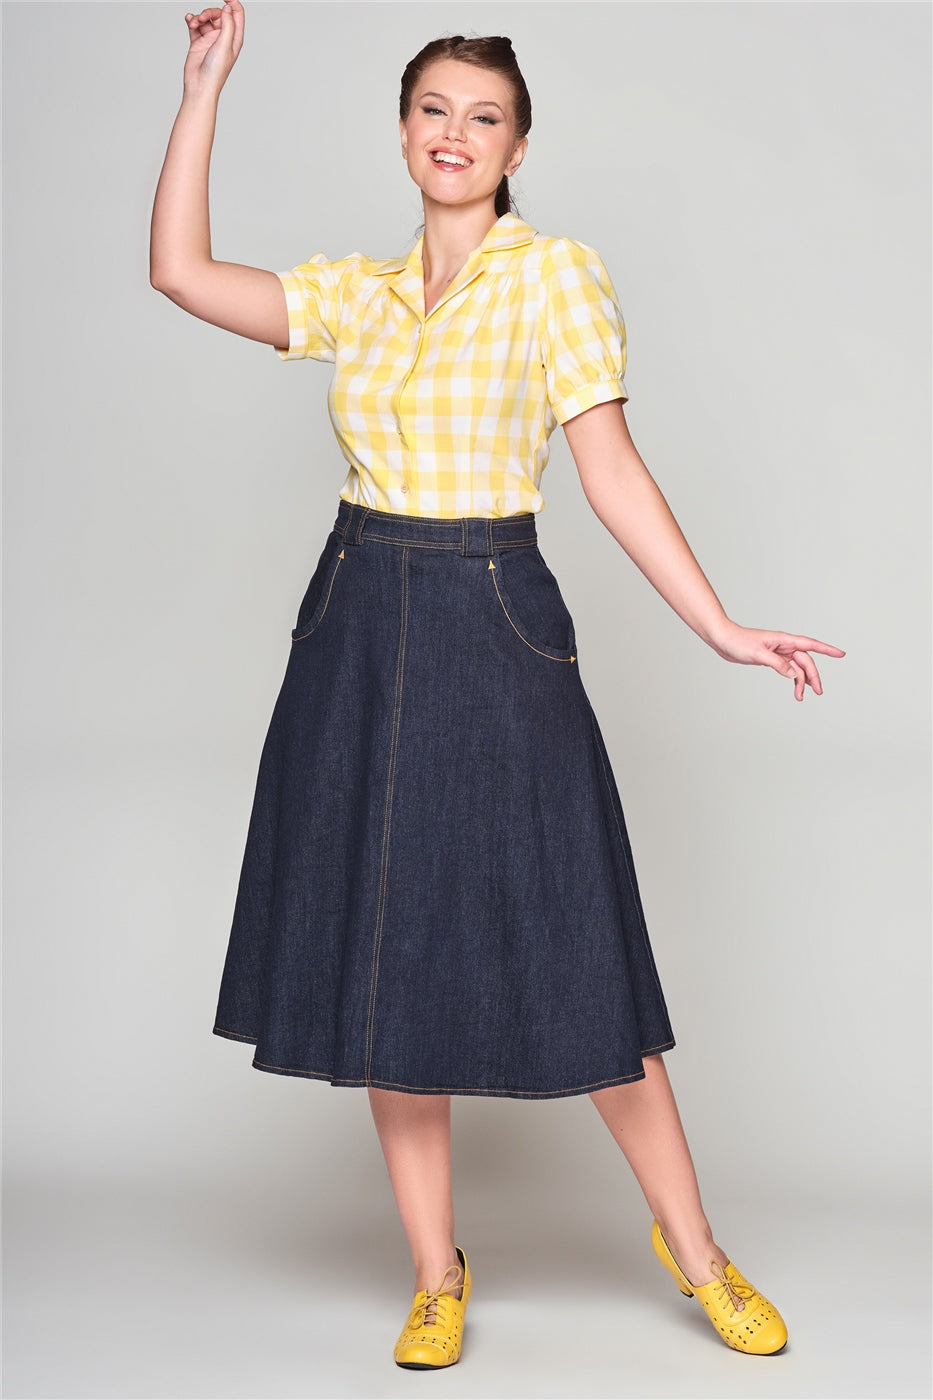 Happy woman with a radiant smile with one arm up in the air and the other by her side wearing a denim skirt, yellow gingham 40s style blouse and yellow heeled shoes.